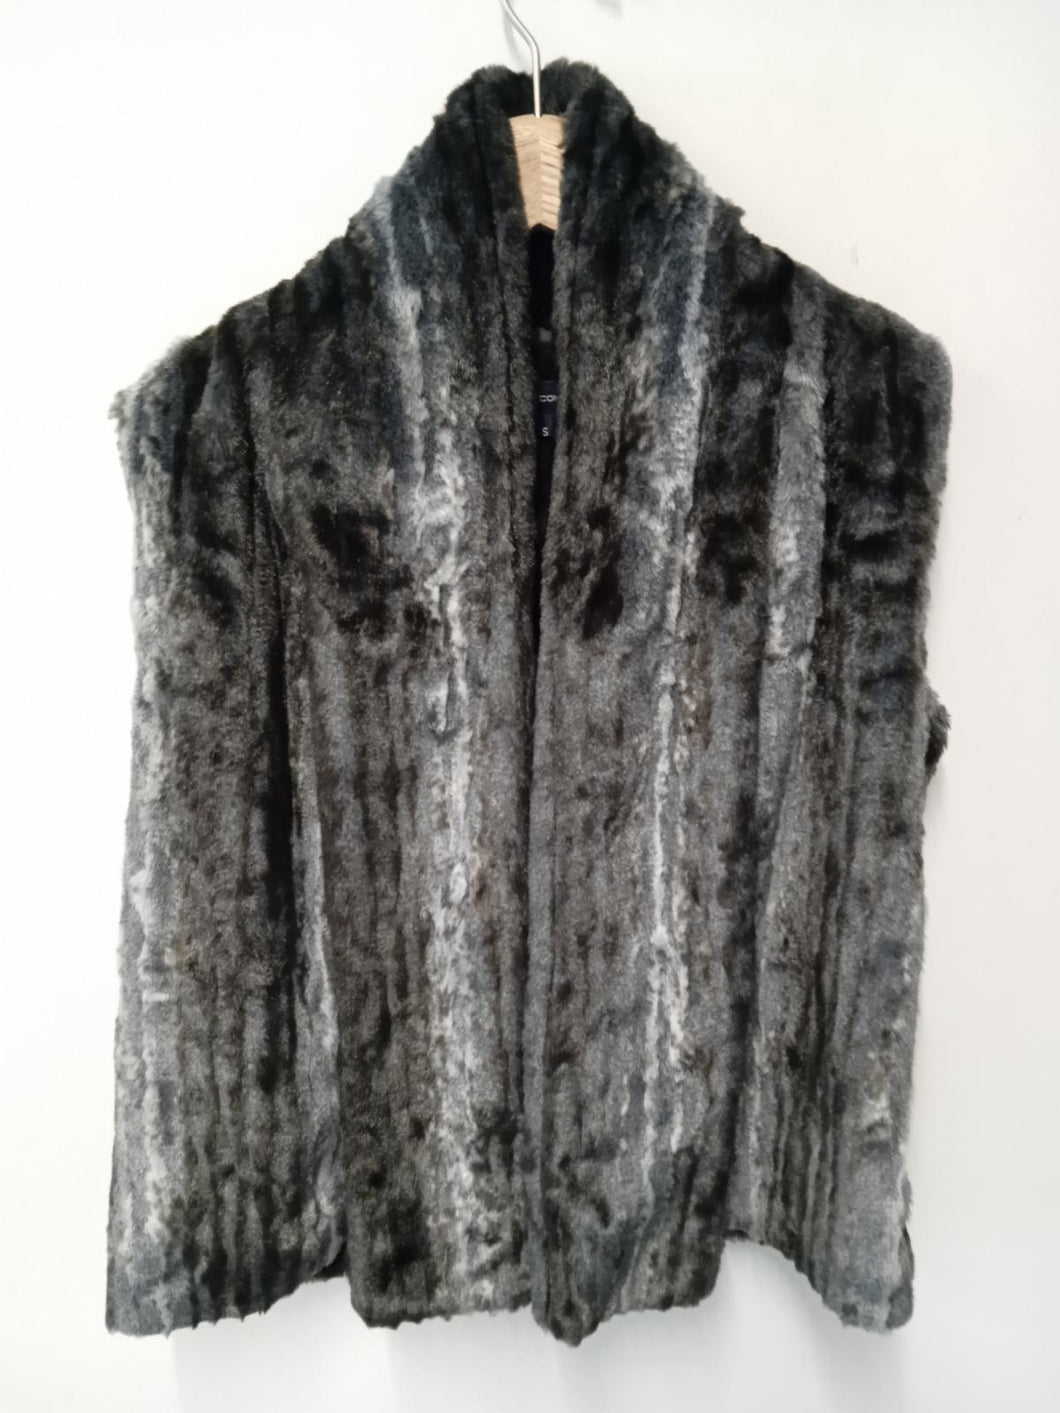 FRENCH CONNECTION Ladies Grey Fluffy Long Sleeve Zipless Gilet Size UK S